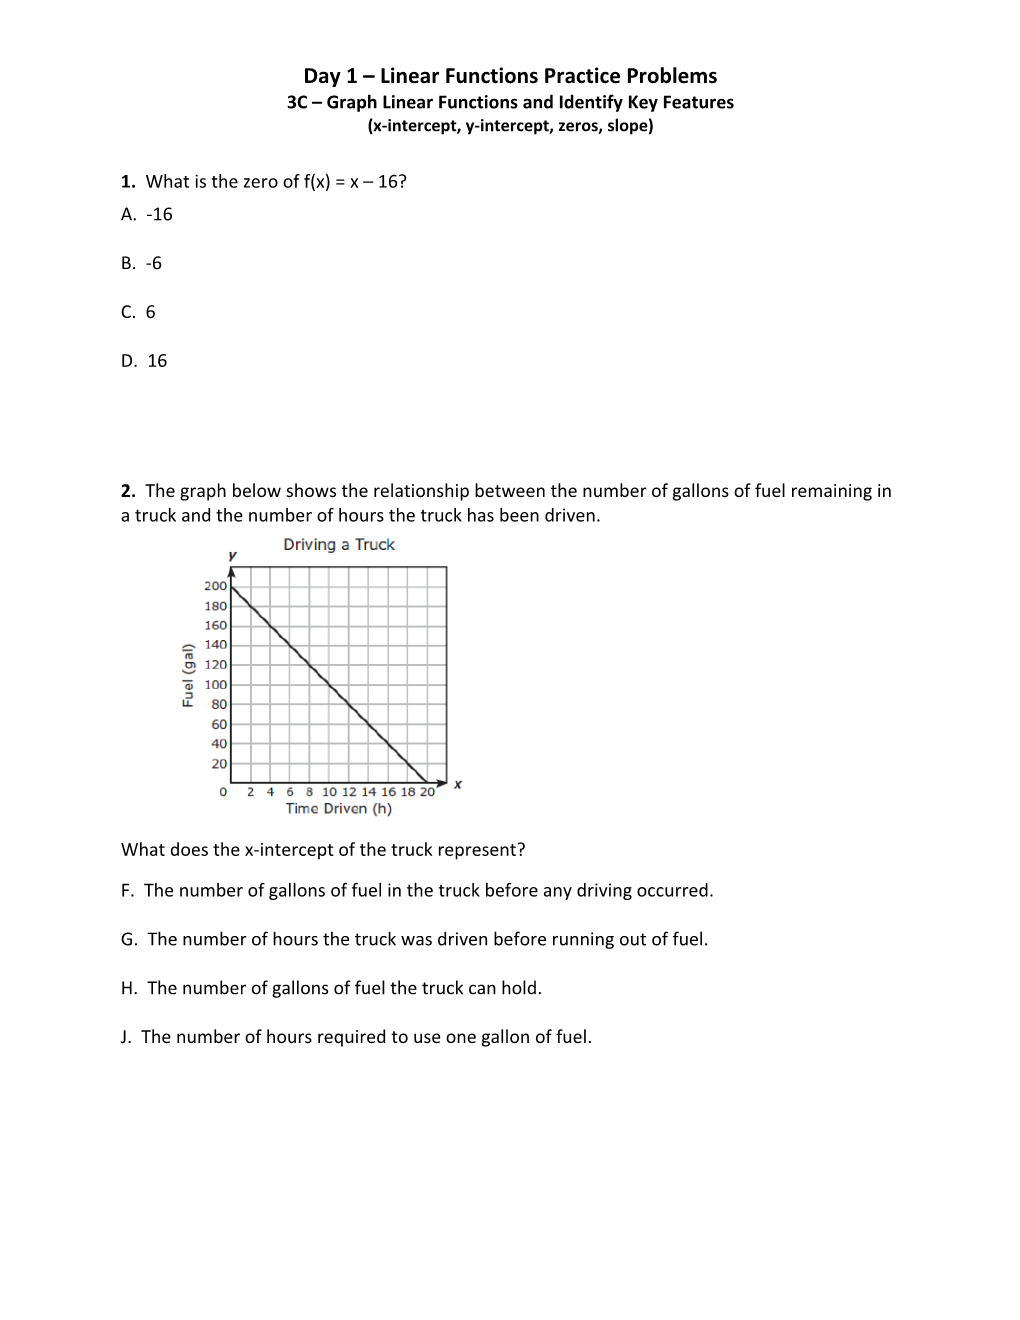 Day 1 Linear Functions Practice Problems